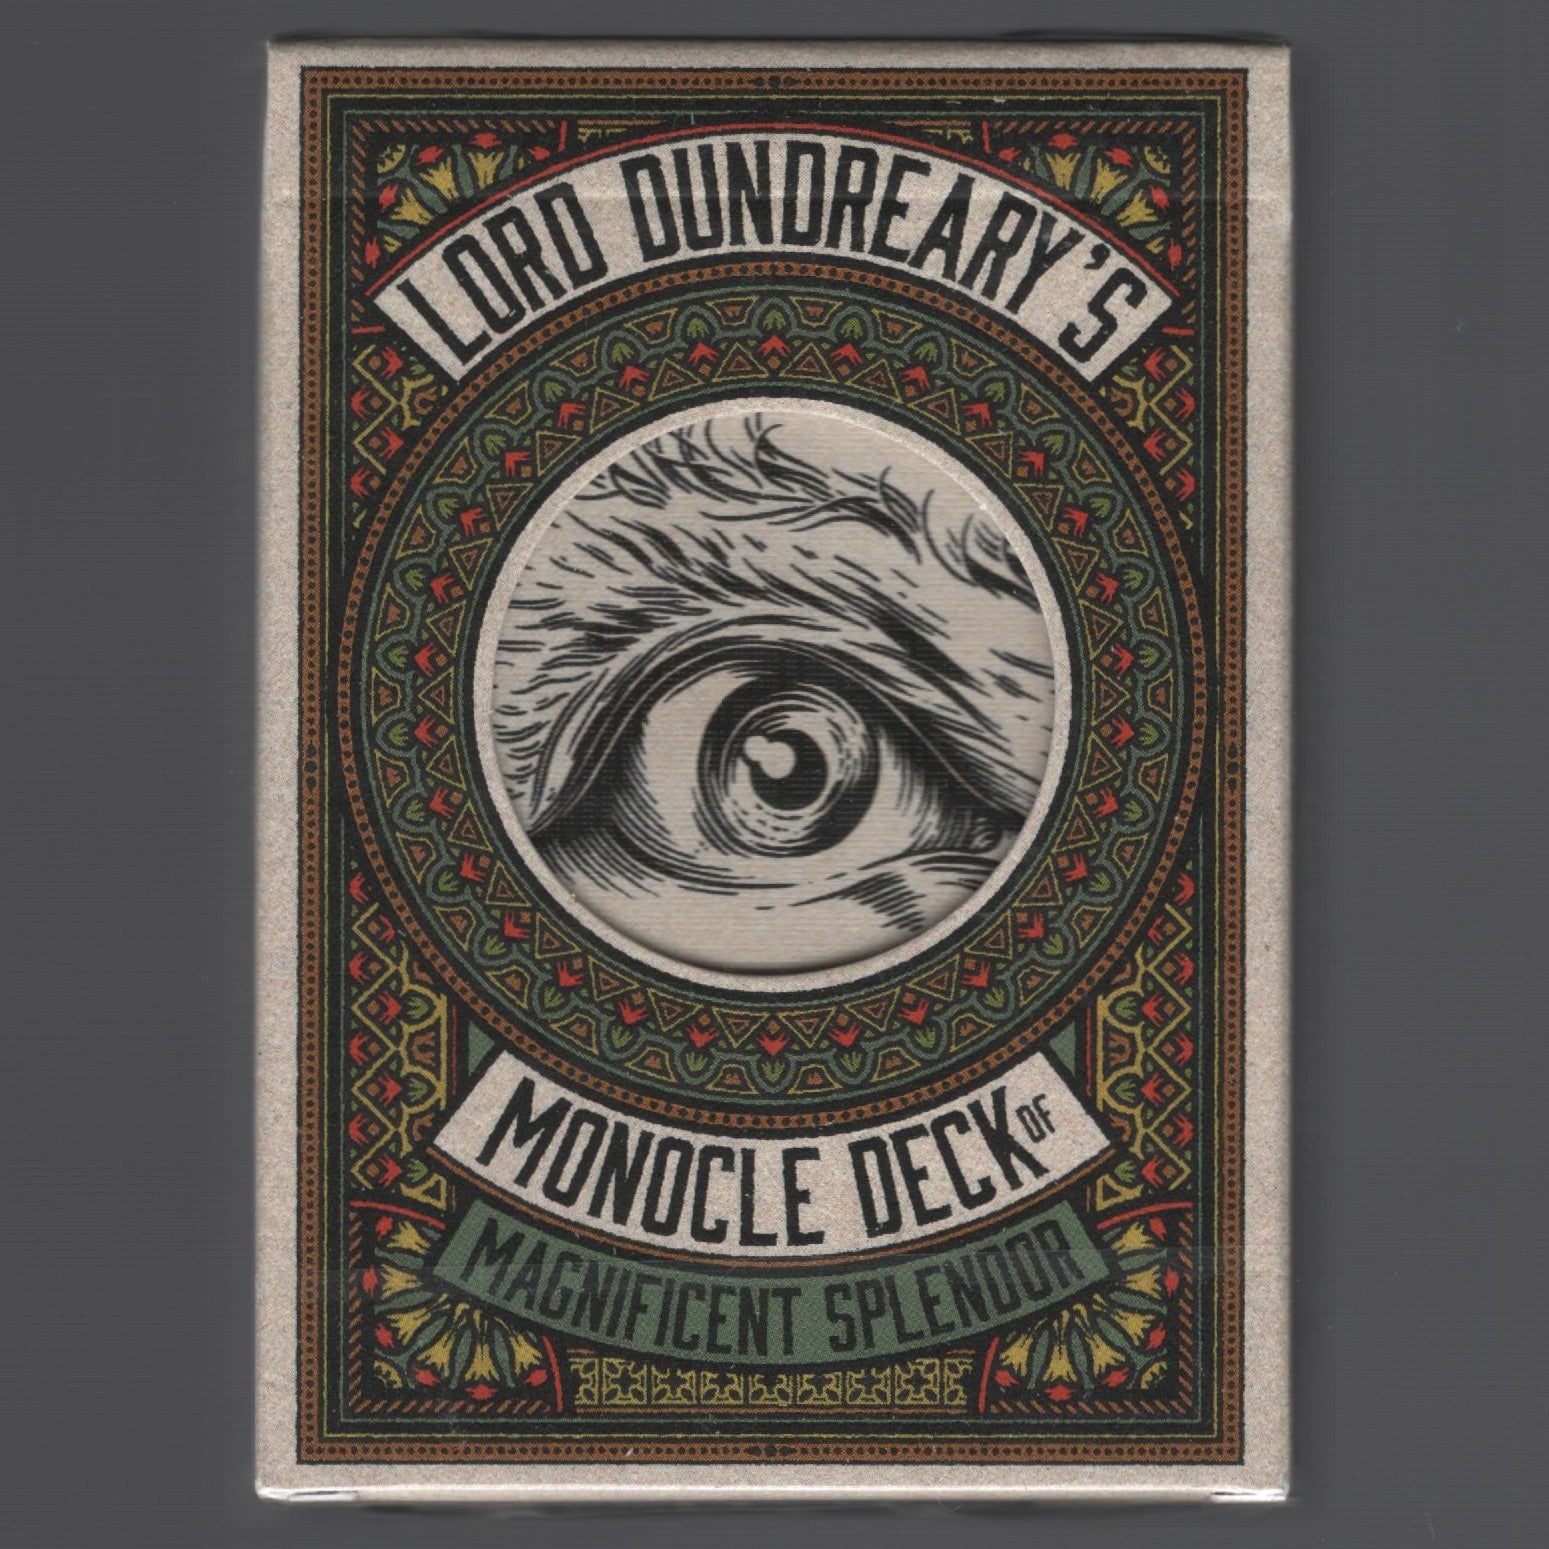 Lord Dundreary's Monocle Deck of Magnificent Splendor (Limited)